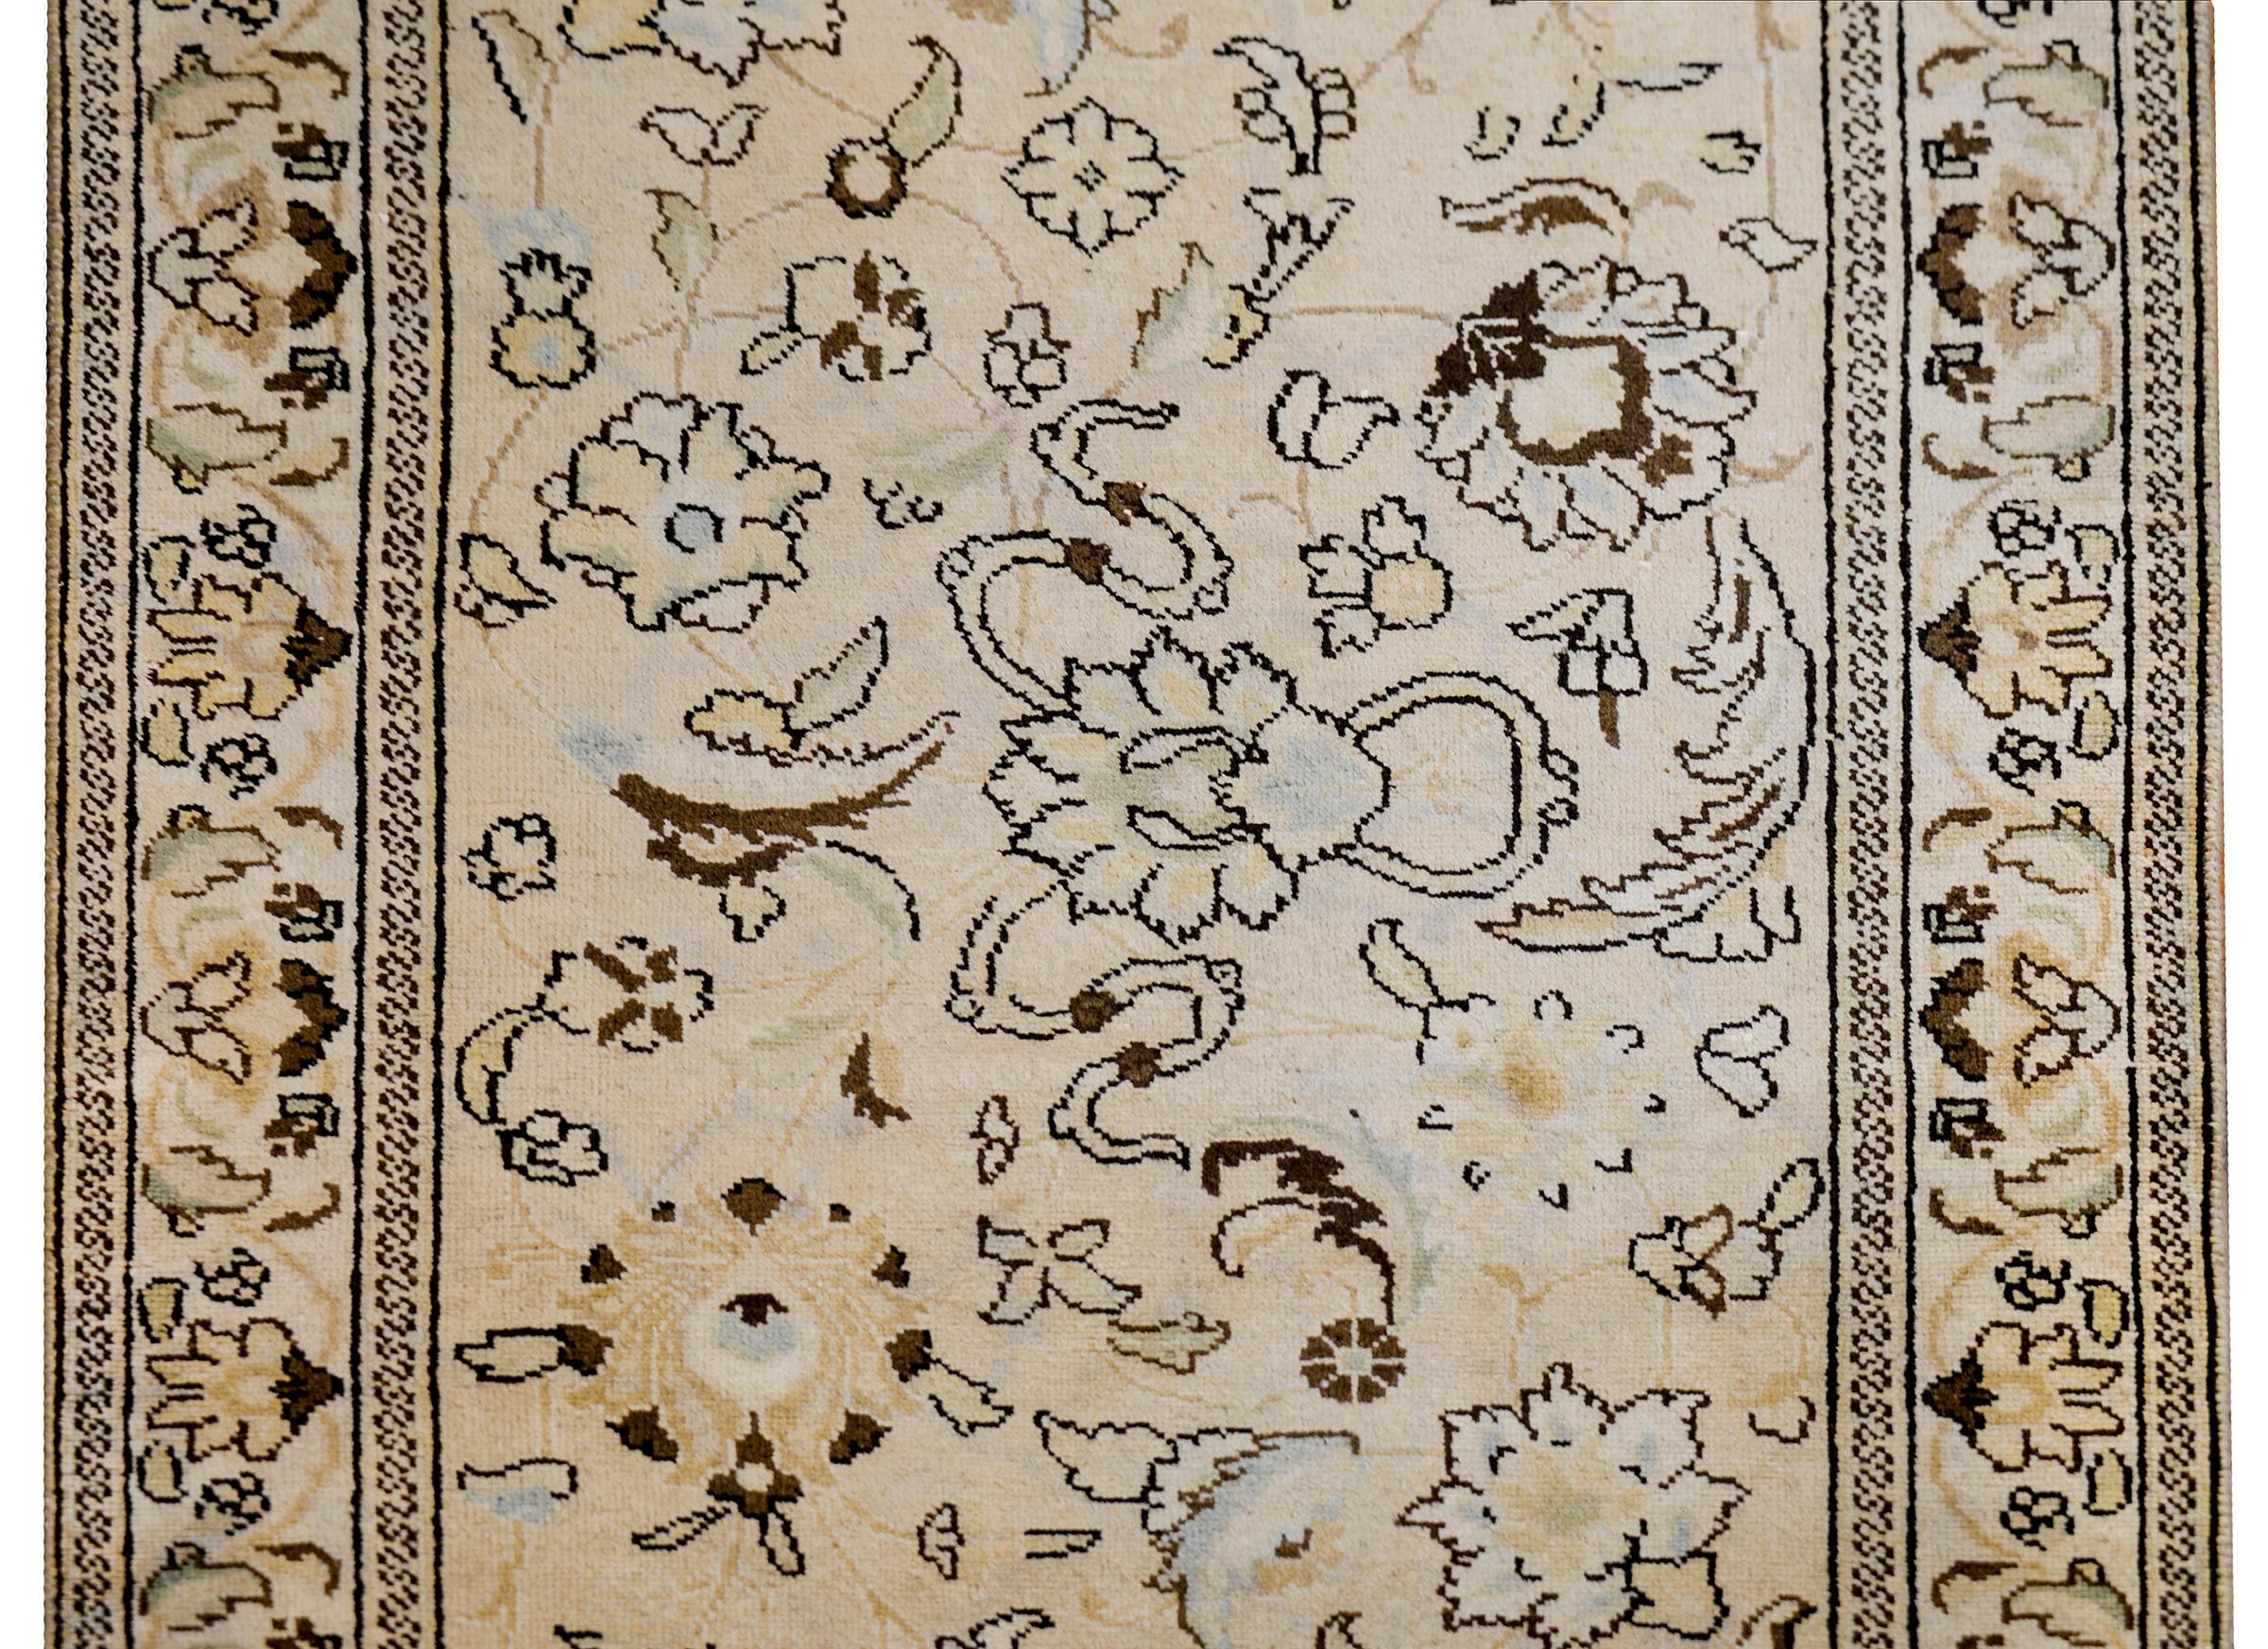 An early 20th century Persian Tabriz runner with a finely rendered large-scale floral and scrolling vine pattern woven in cream, brown, pale indigo, and pale orange vegetable dyed wool. The border is simple, with a central stripe similarly styled to